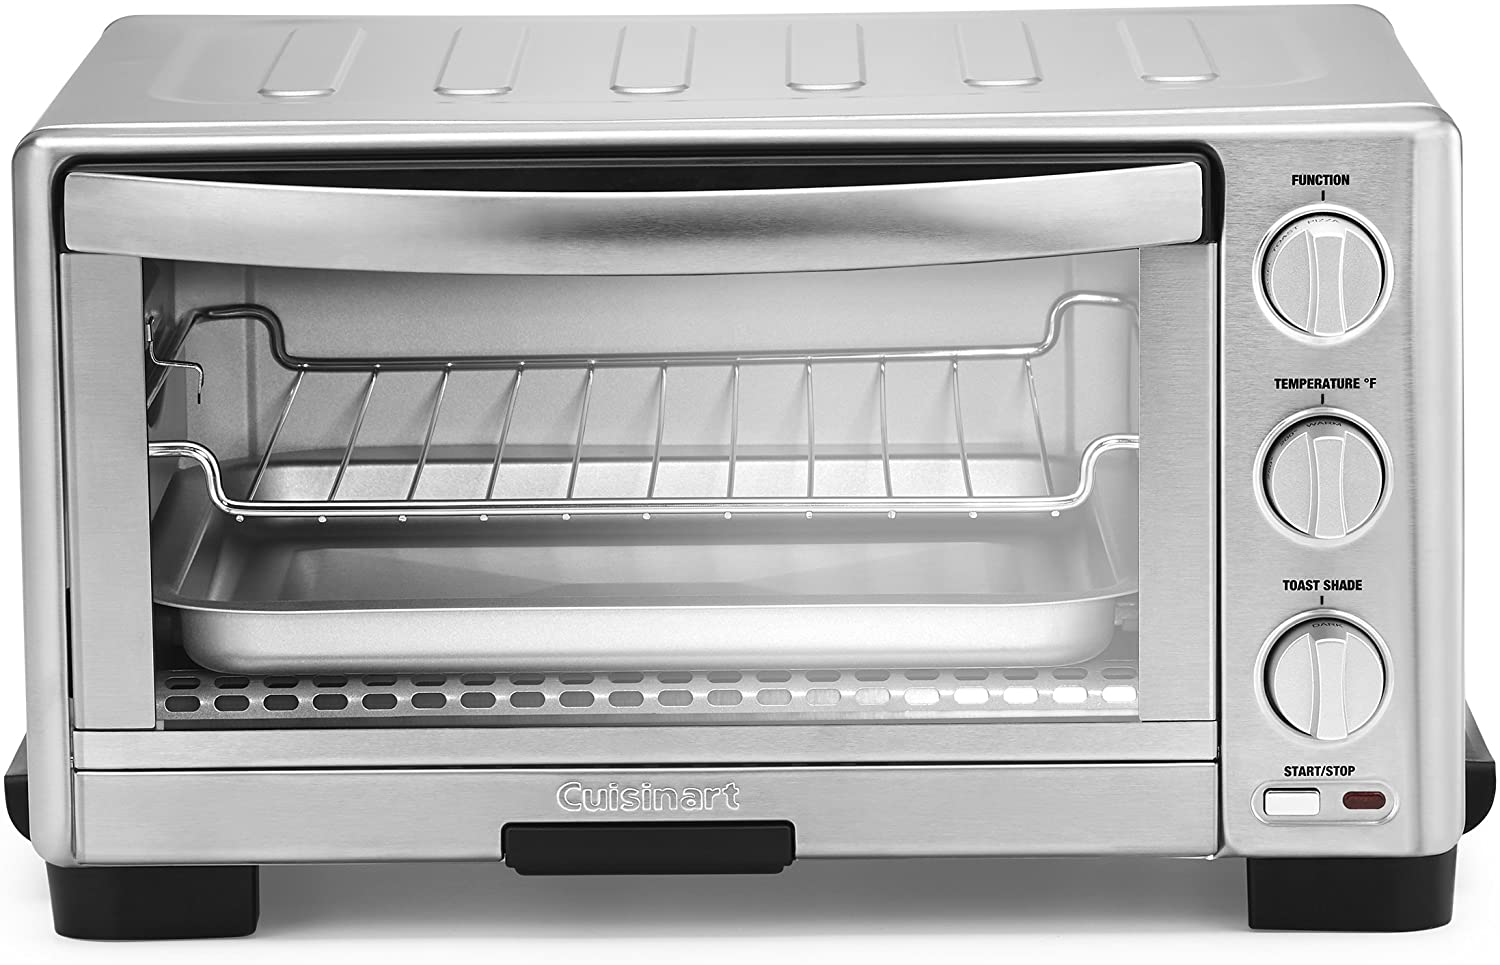 Best Rated Toaster Ovens - Cuisinart TOB-1010 Toaster Oven ...